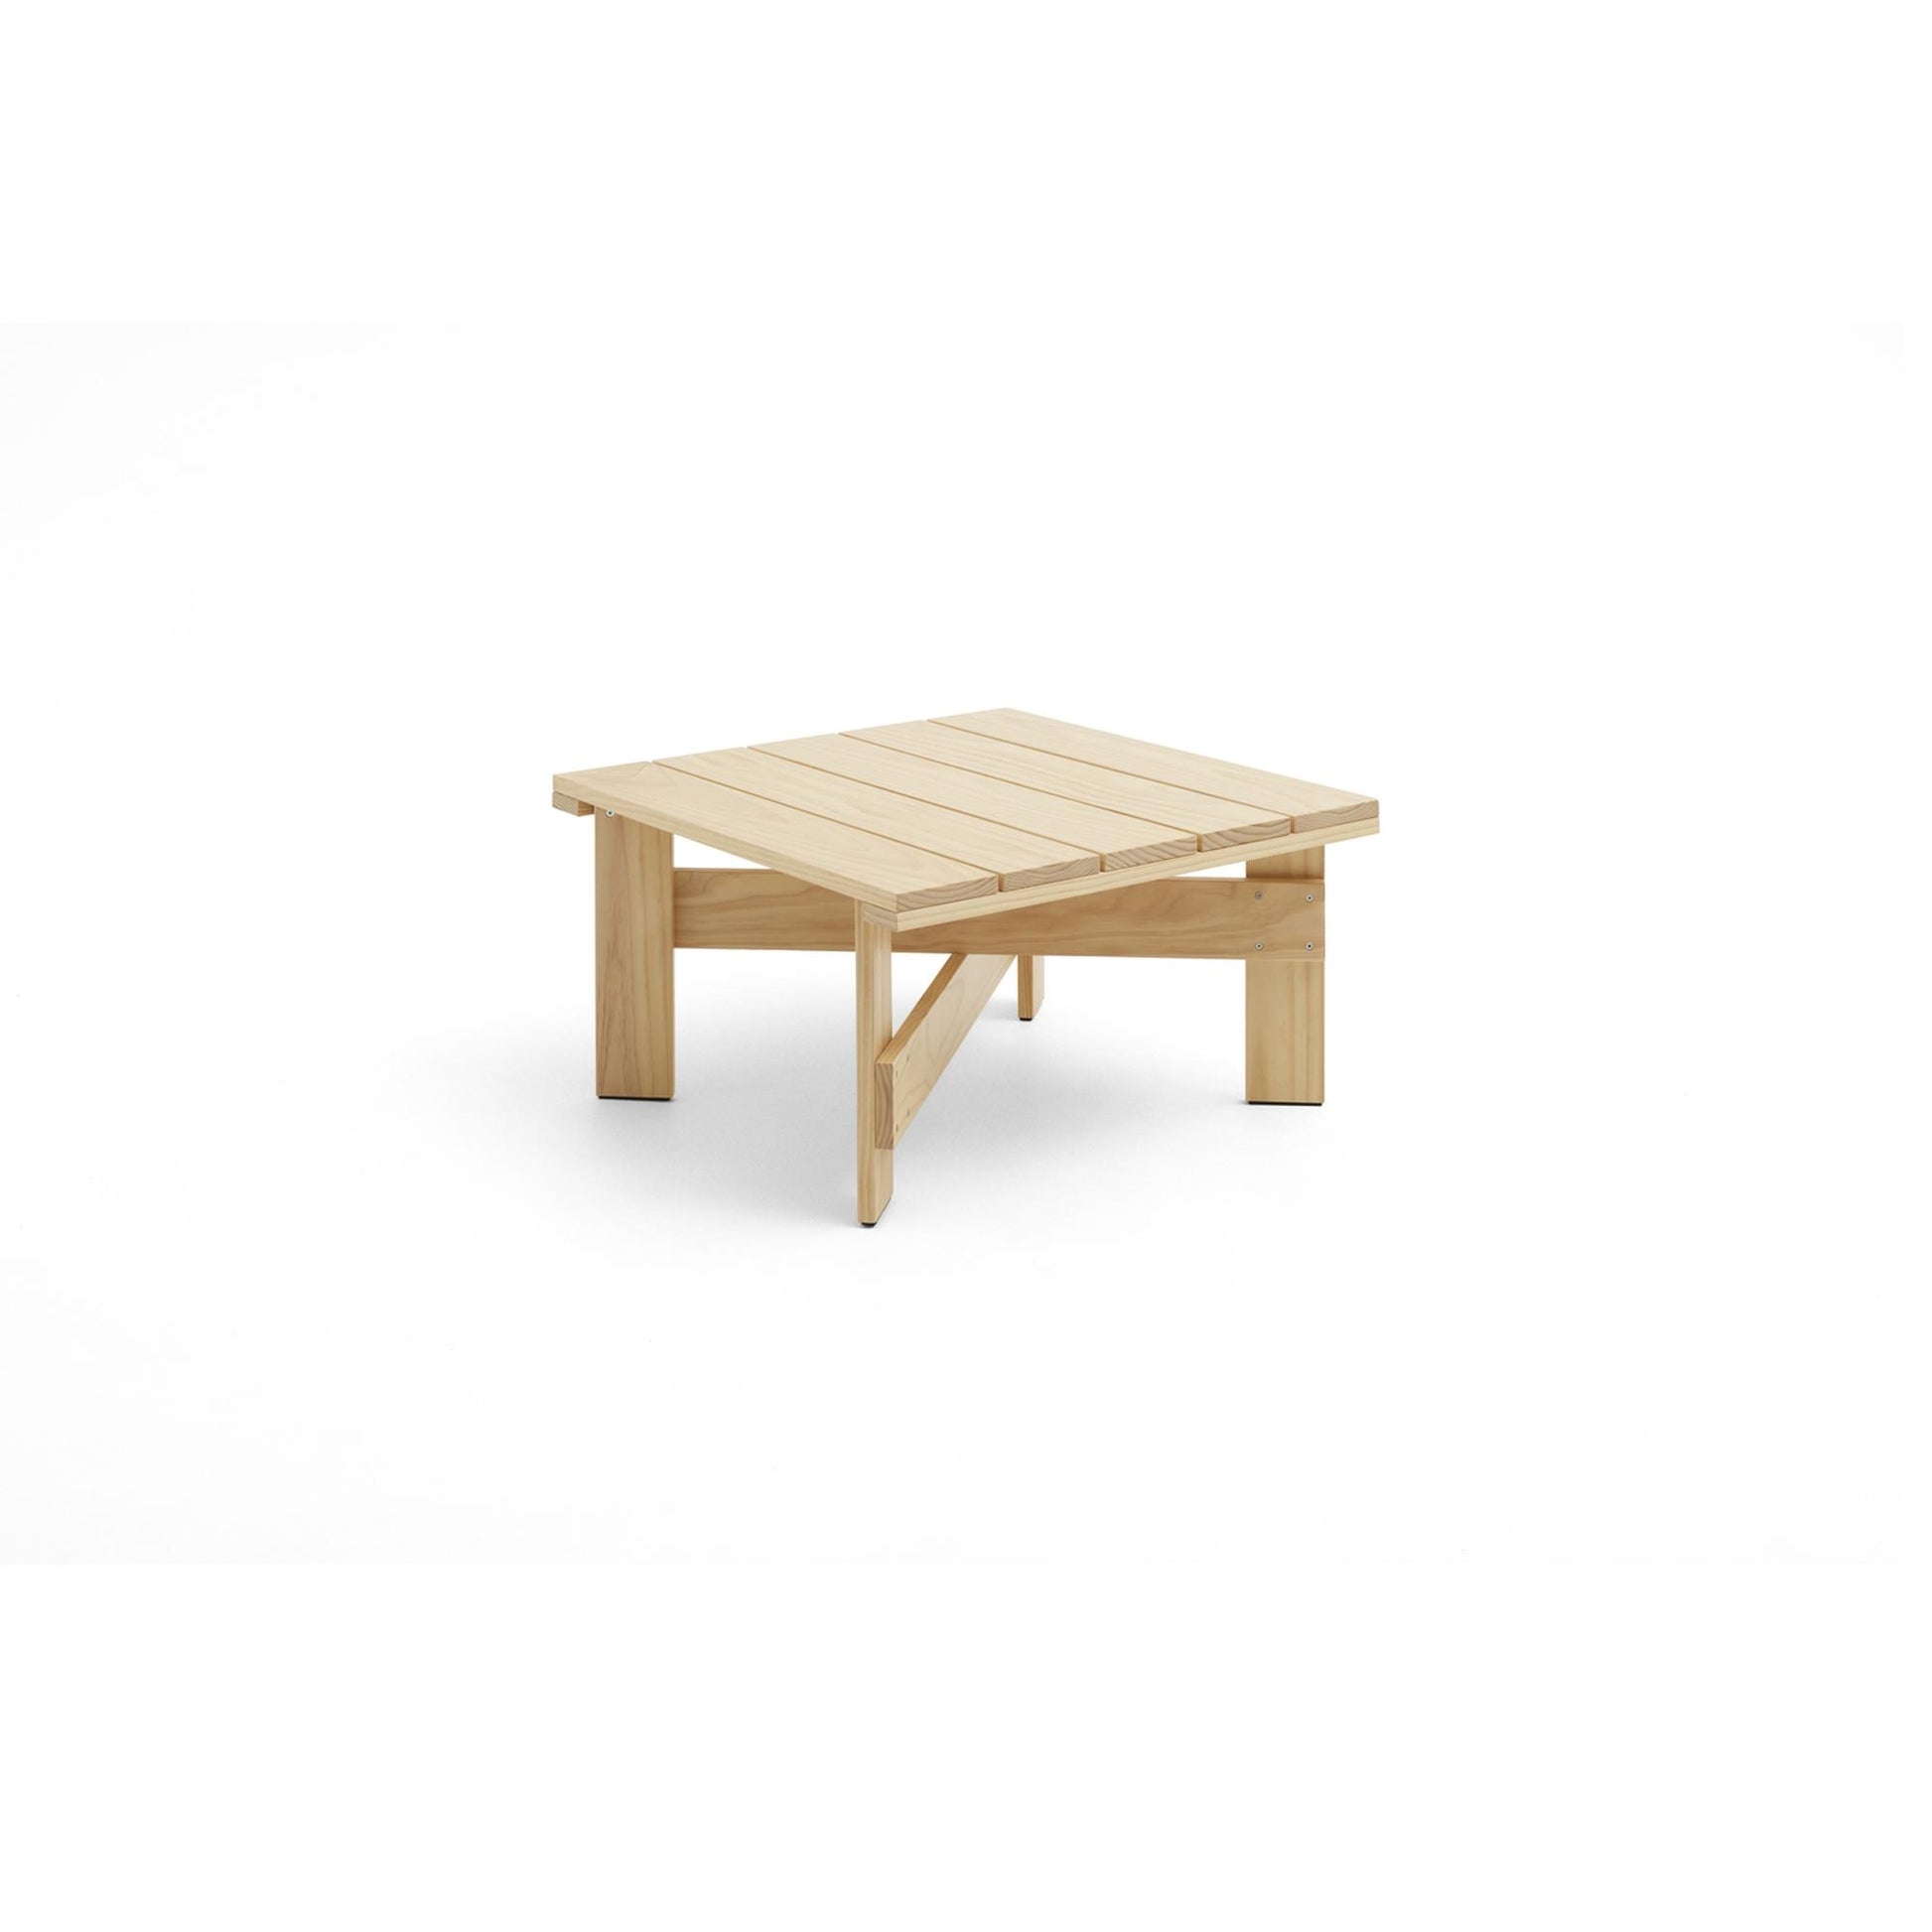 Crate Low Coffee Table by HAY #Lacquered Pine